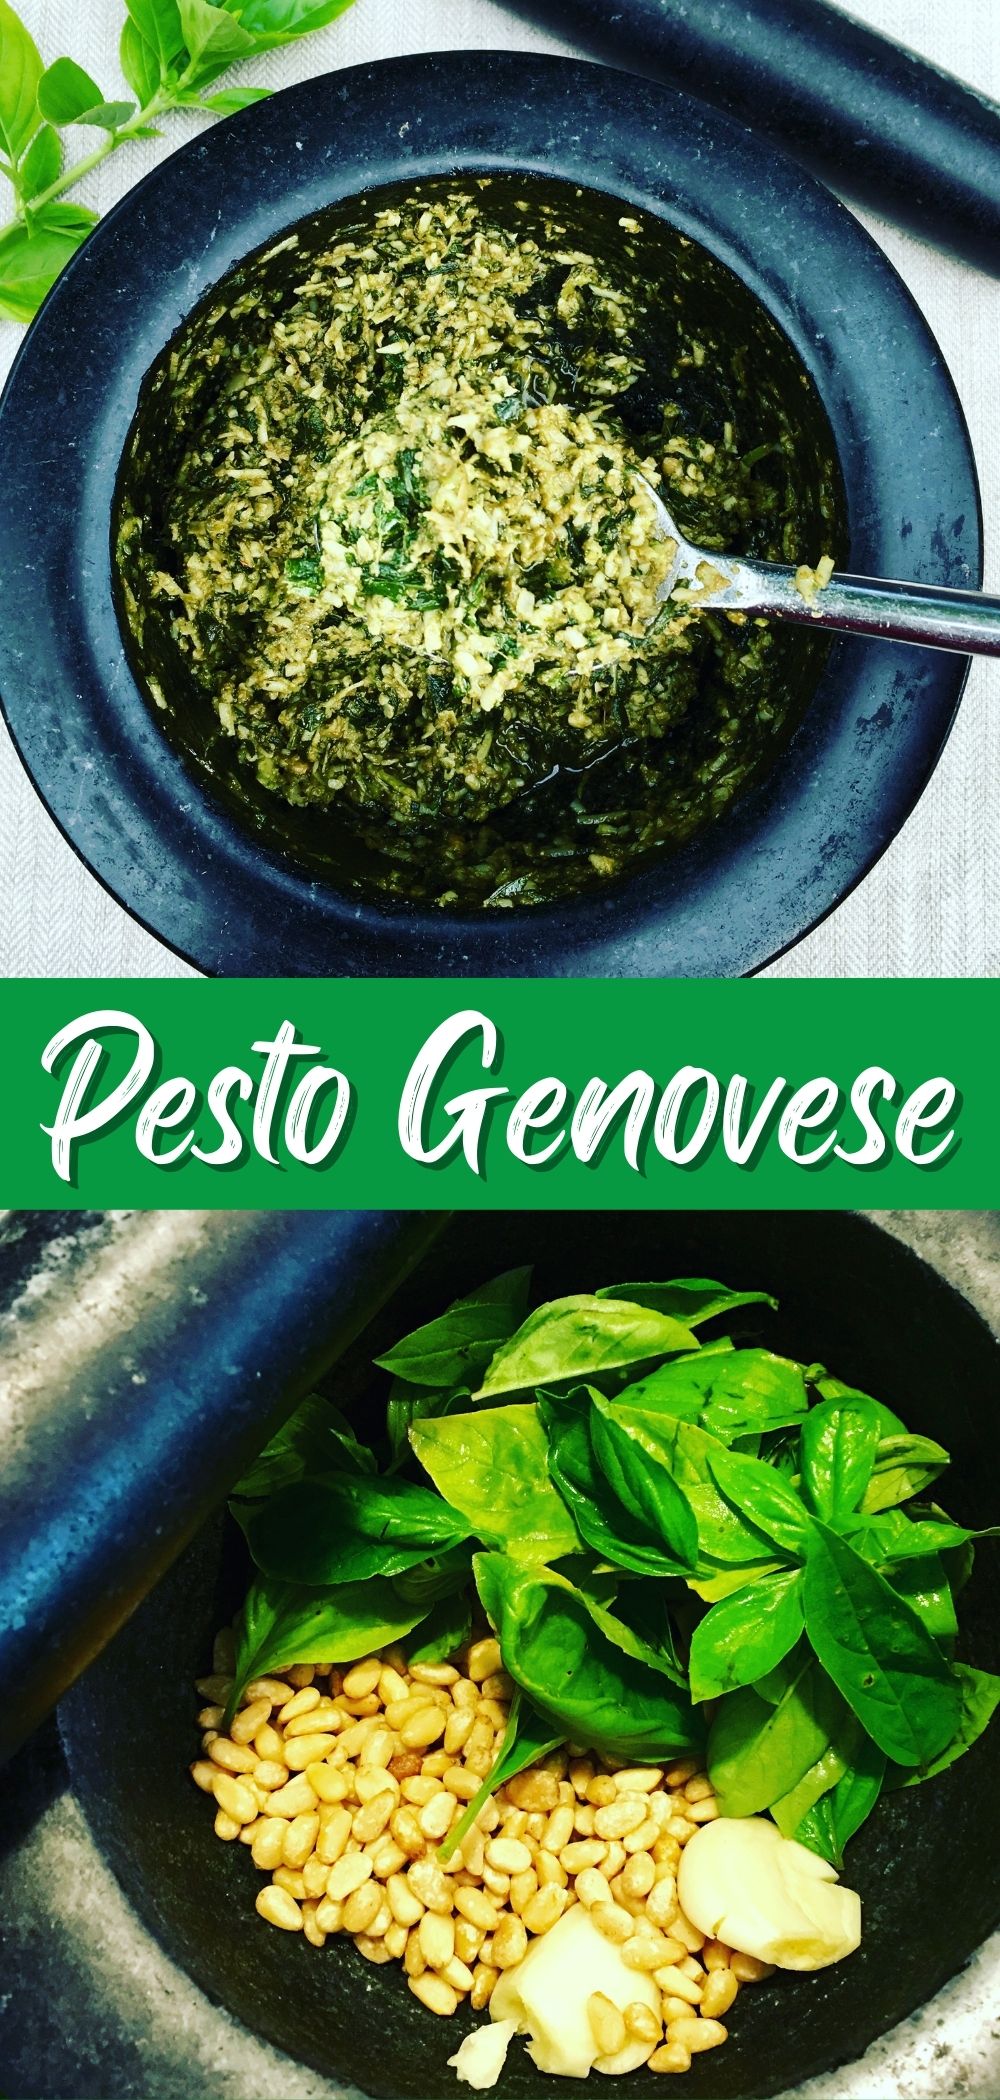 pesto made in a pestle and mortar